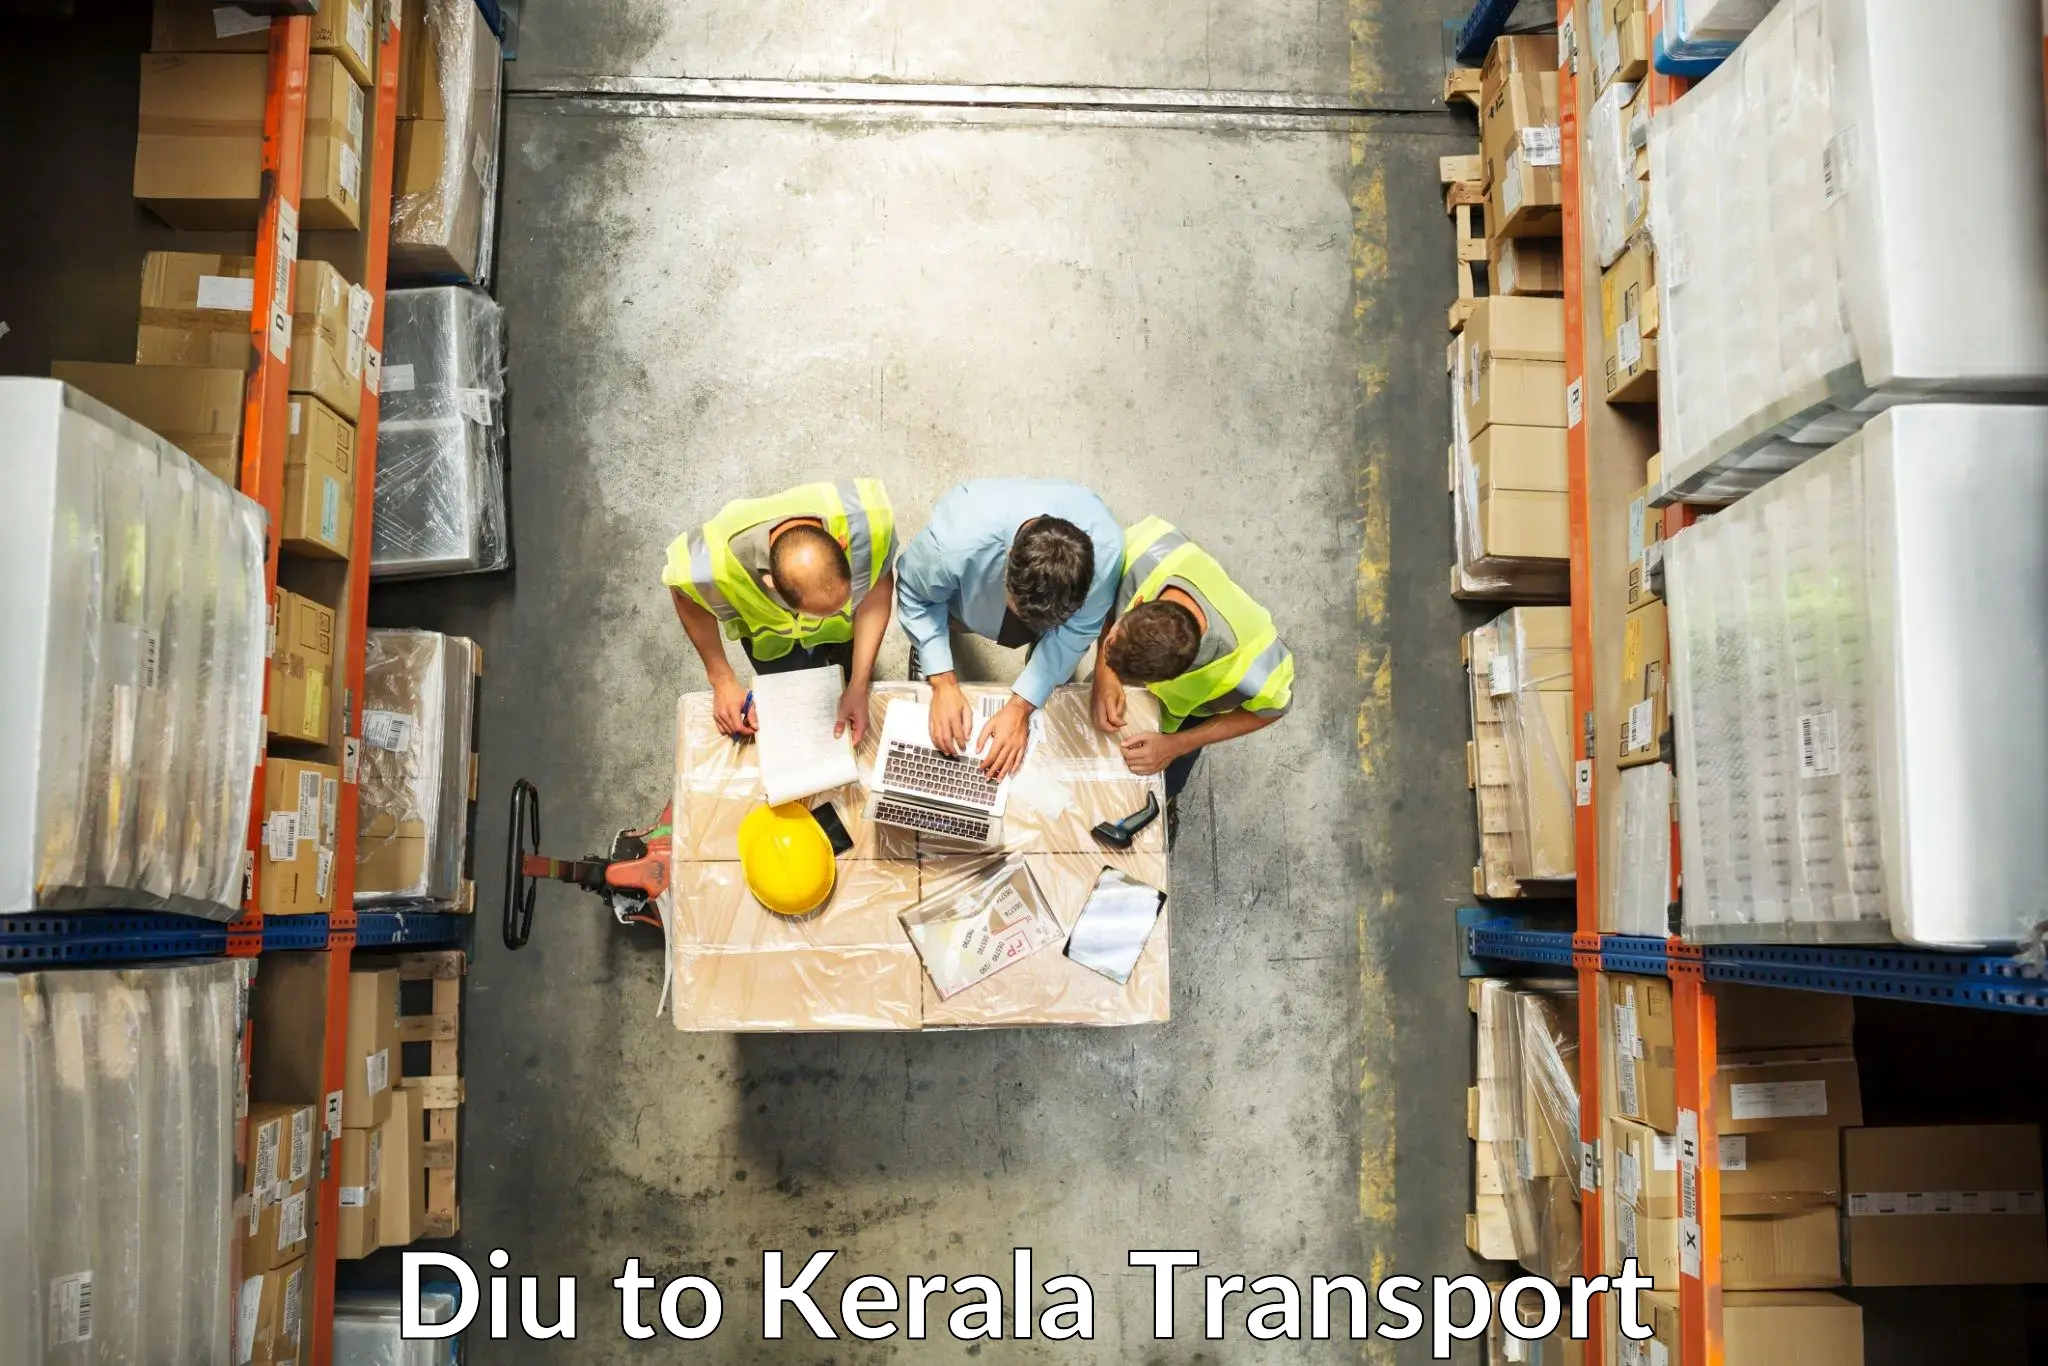 Part load transport service in India Diu to Kerala